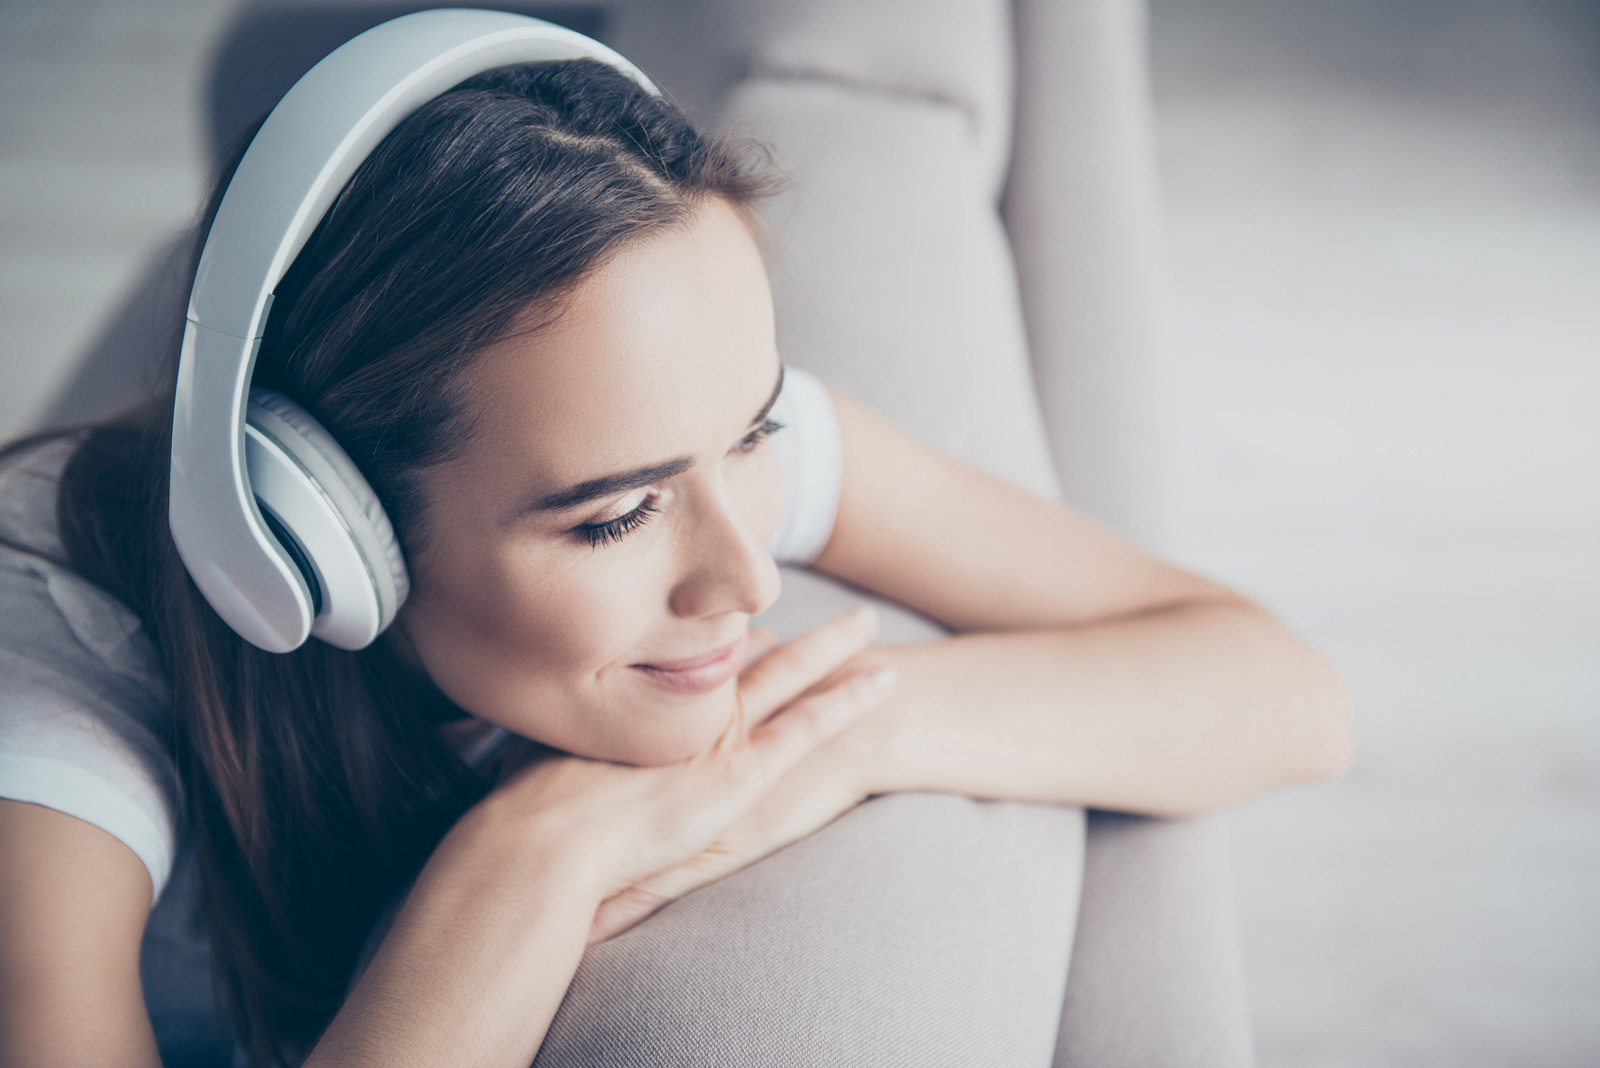 the connection between music and stress